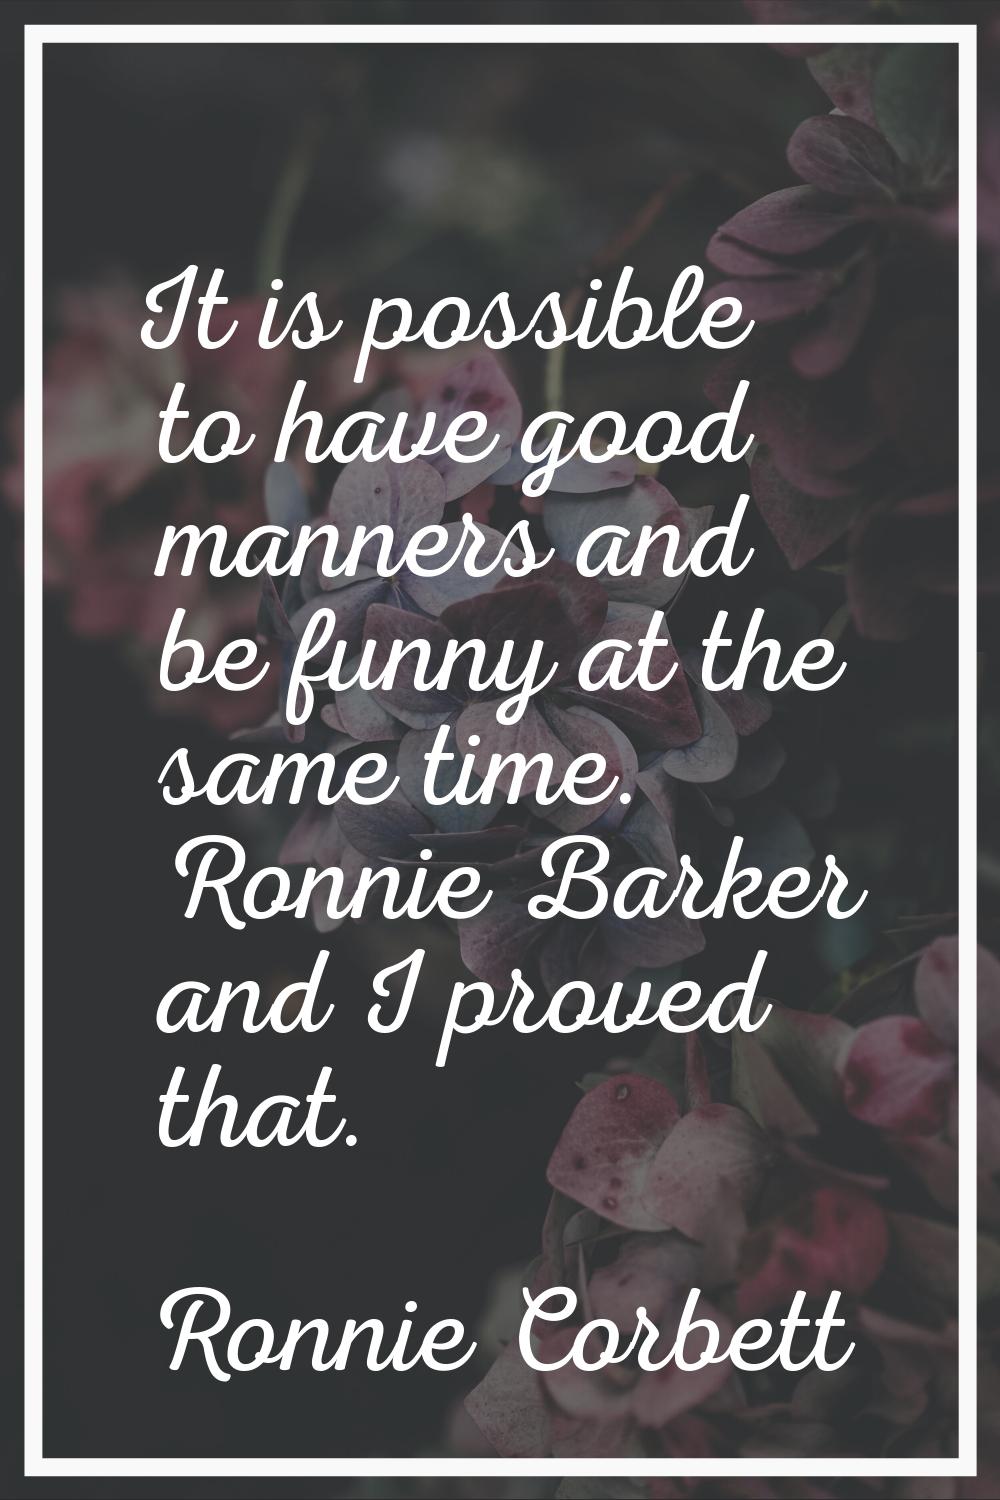 It is possible to have good manners and be funny at the same time. Ronnie Barker and I proved that.